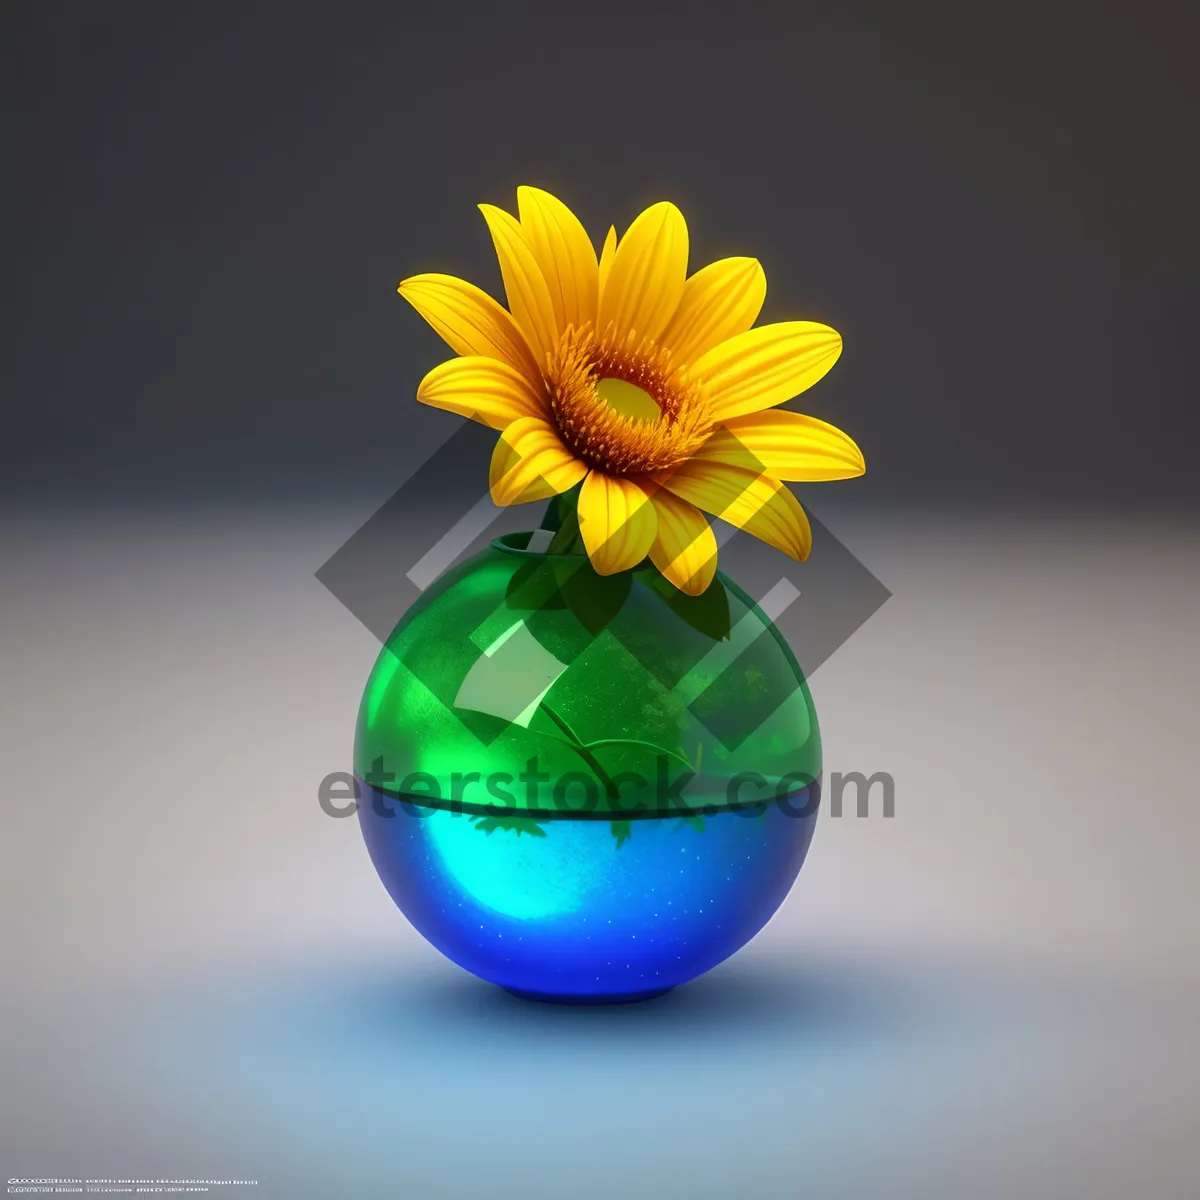 Picture of Bright Yellow Sunflower Blossom in Summer Garden